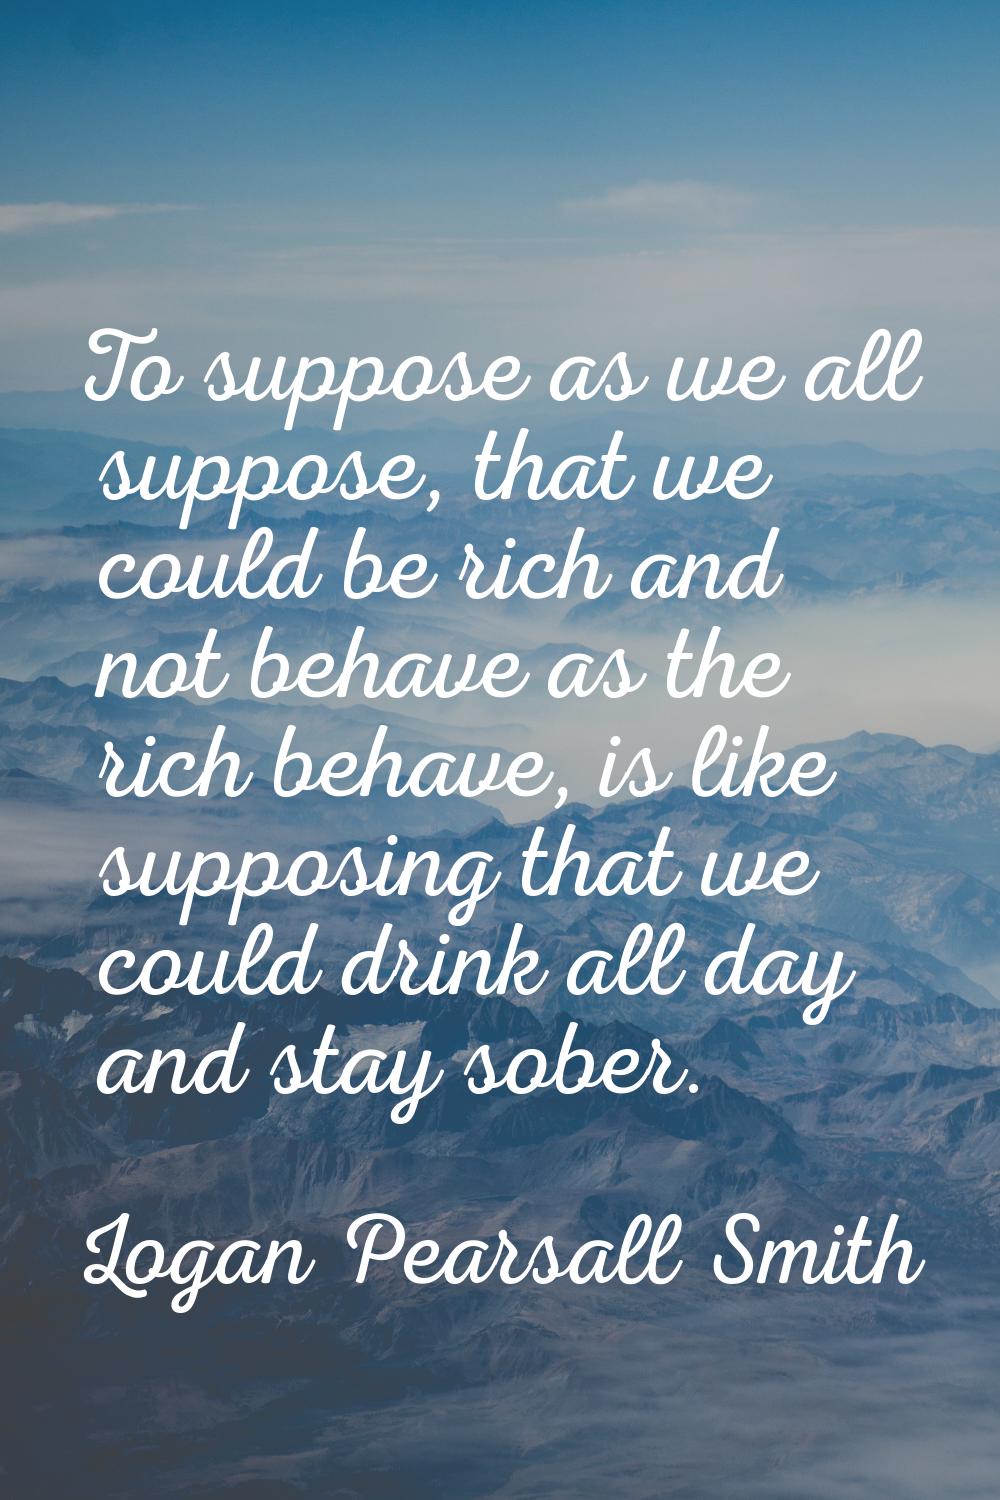 To suppose as we all suppose, that we could be rich and not behave as the rich behave, is like supp